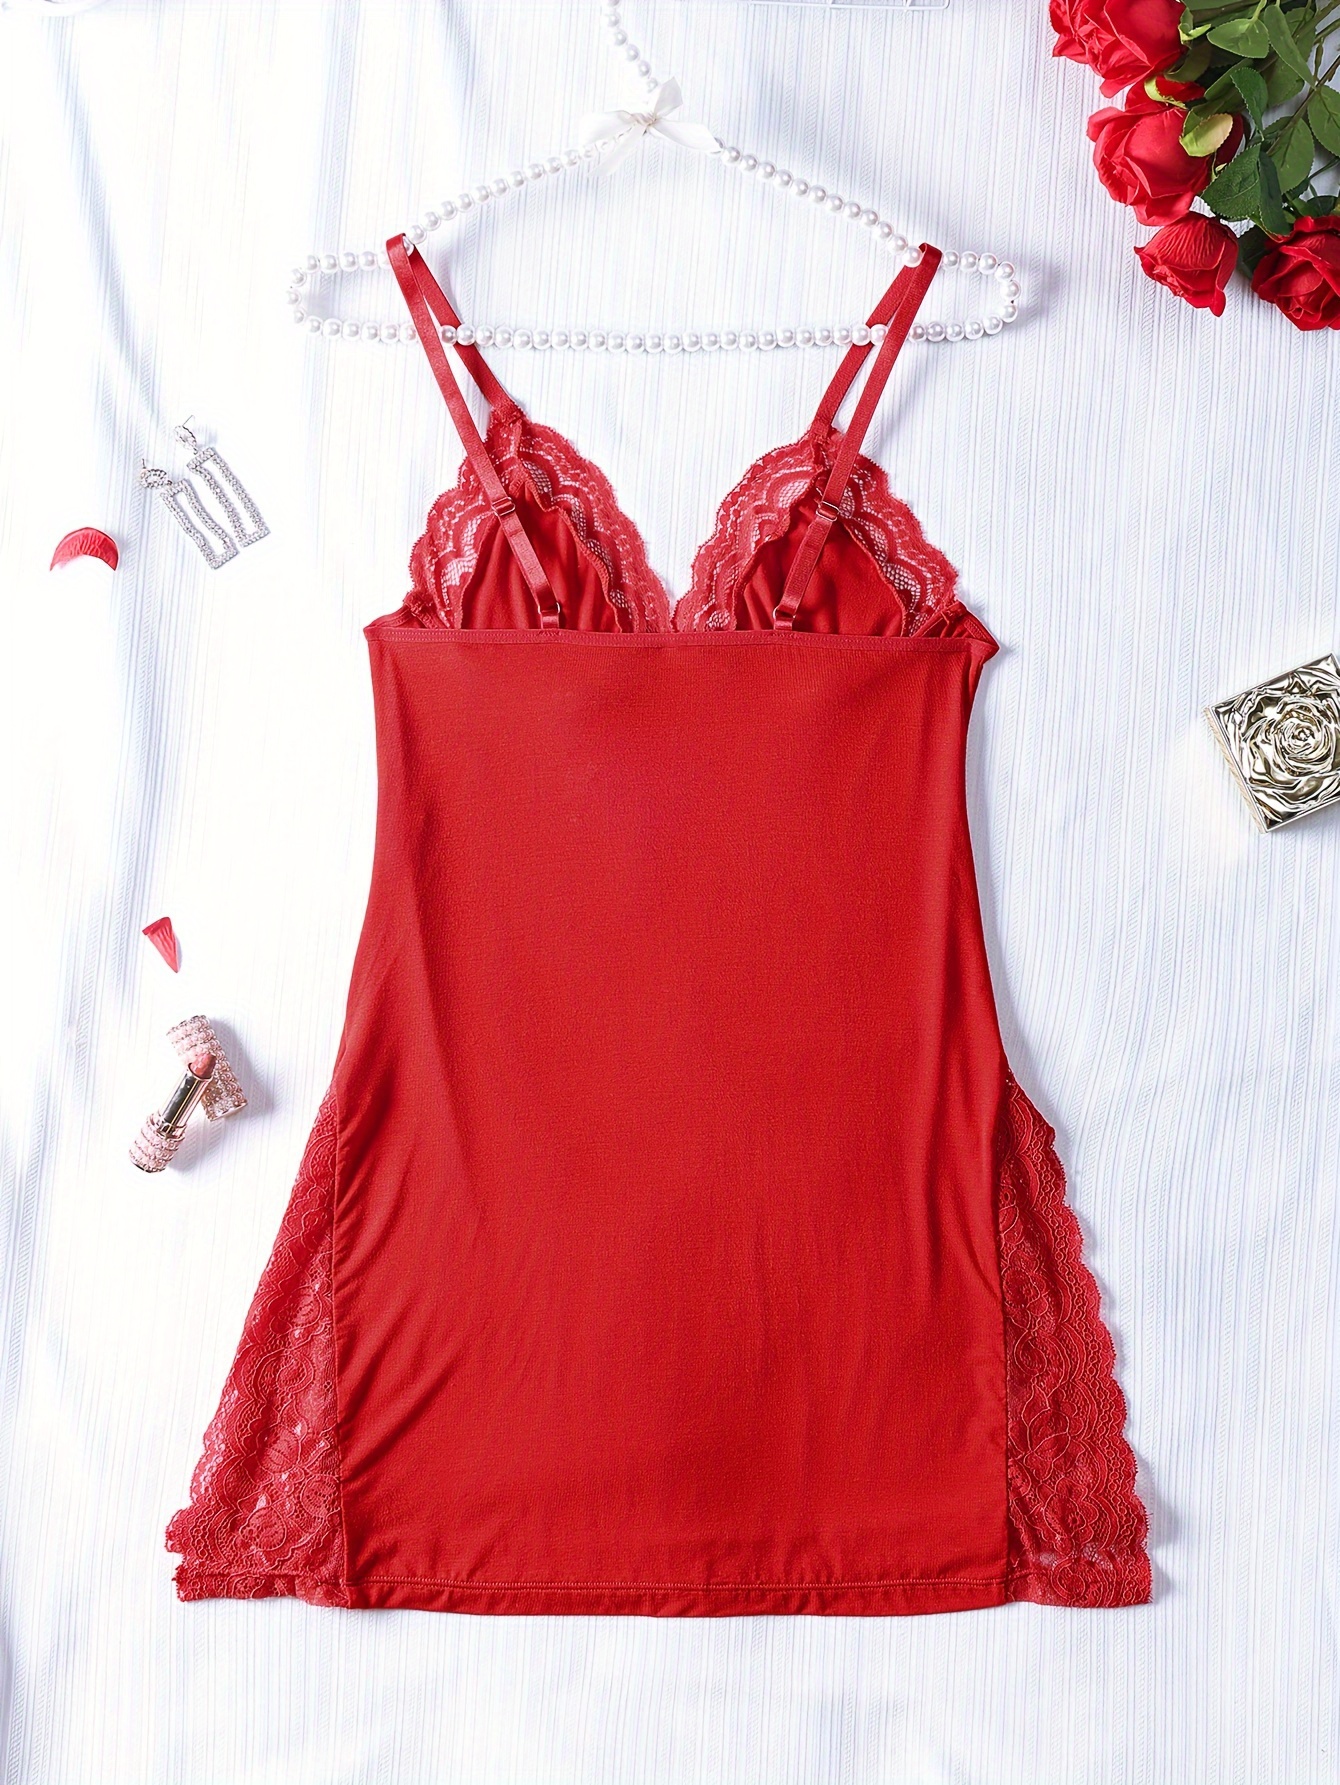 Babydoll Overall Lacy Bralette Dress - Red